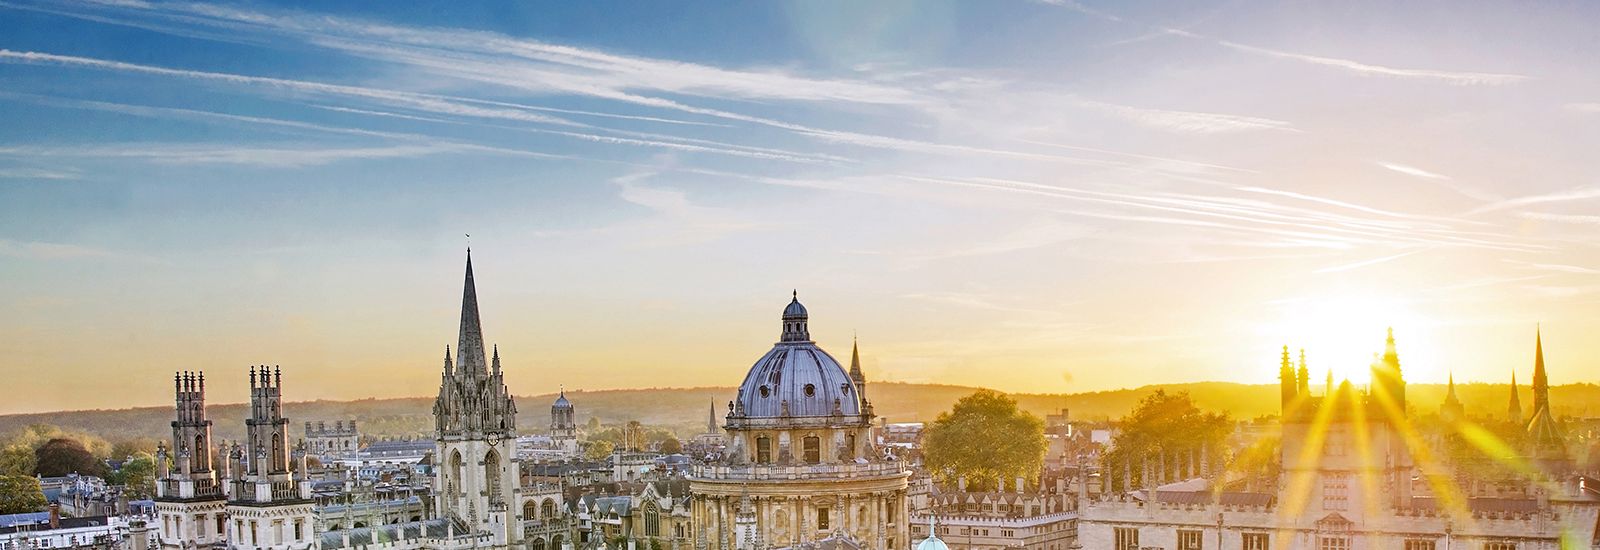 Roofs of All Souls, Radcliffe Camera and Bodleian Library at sunset